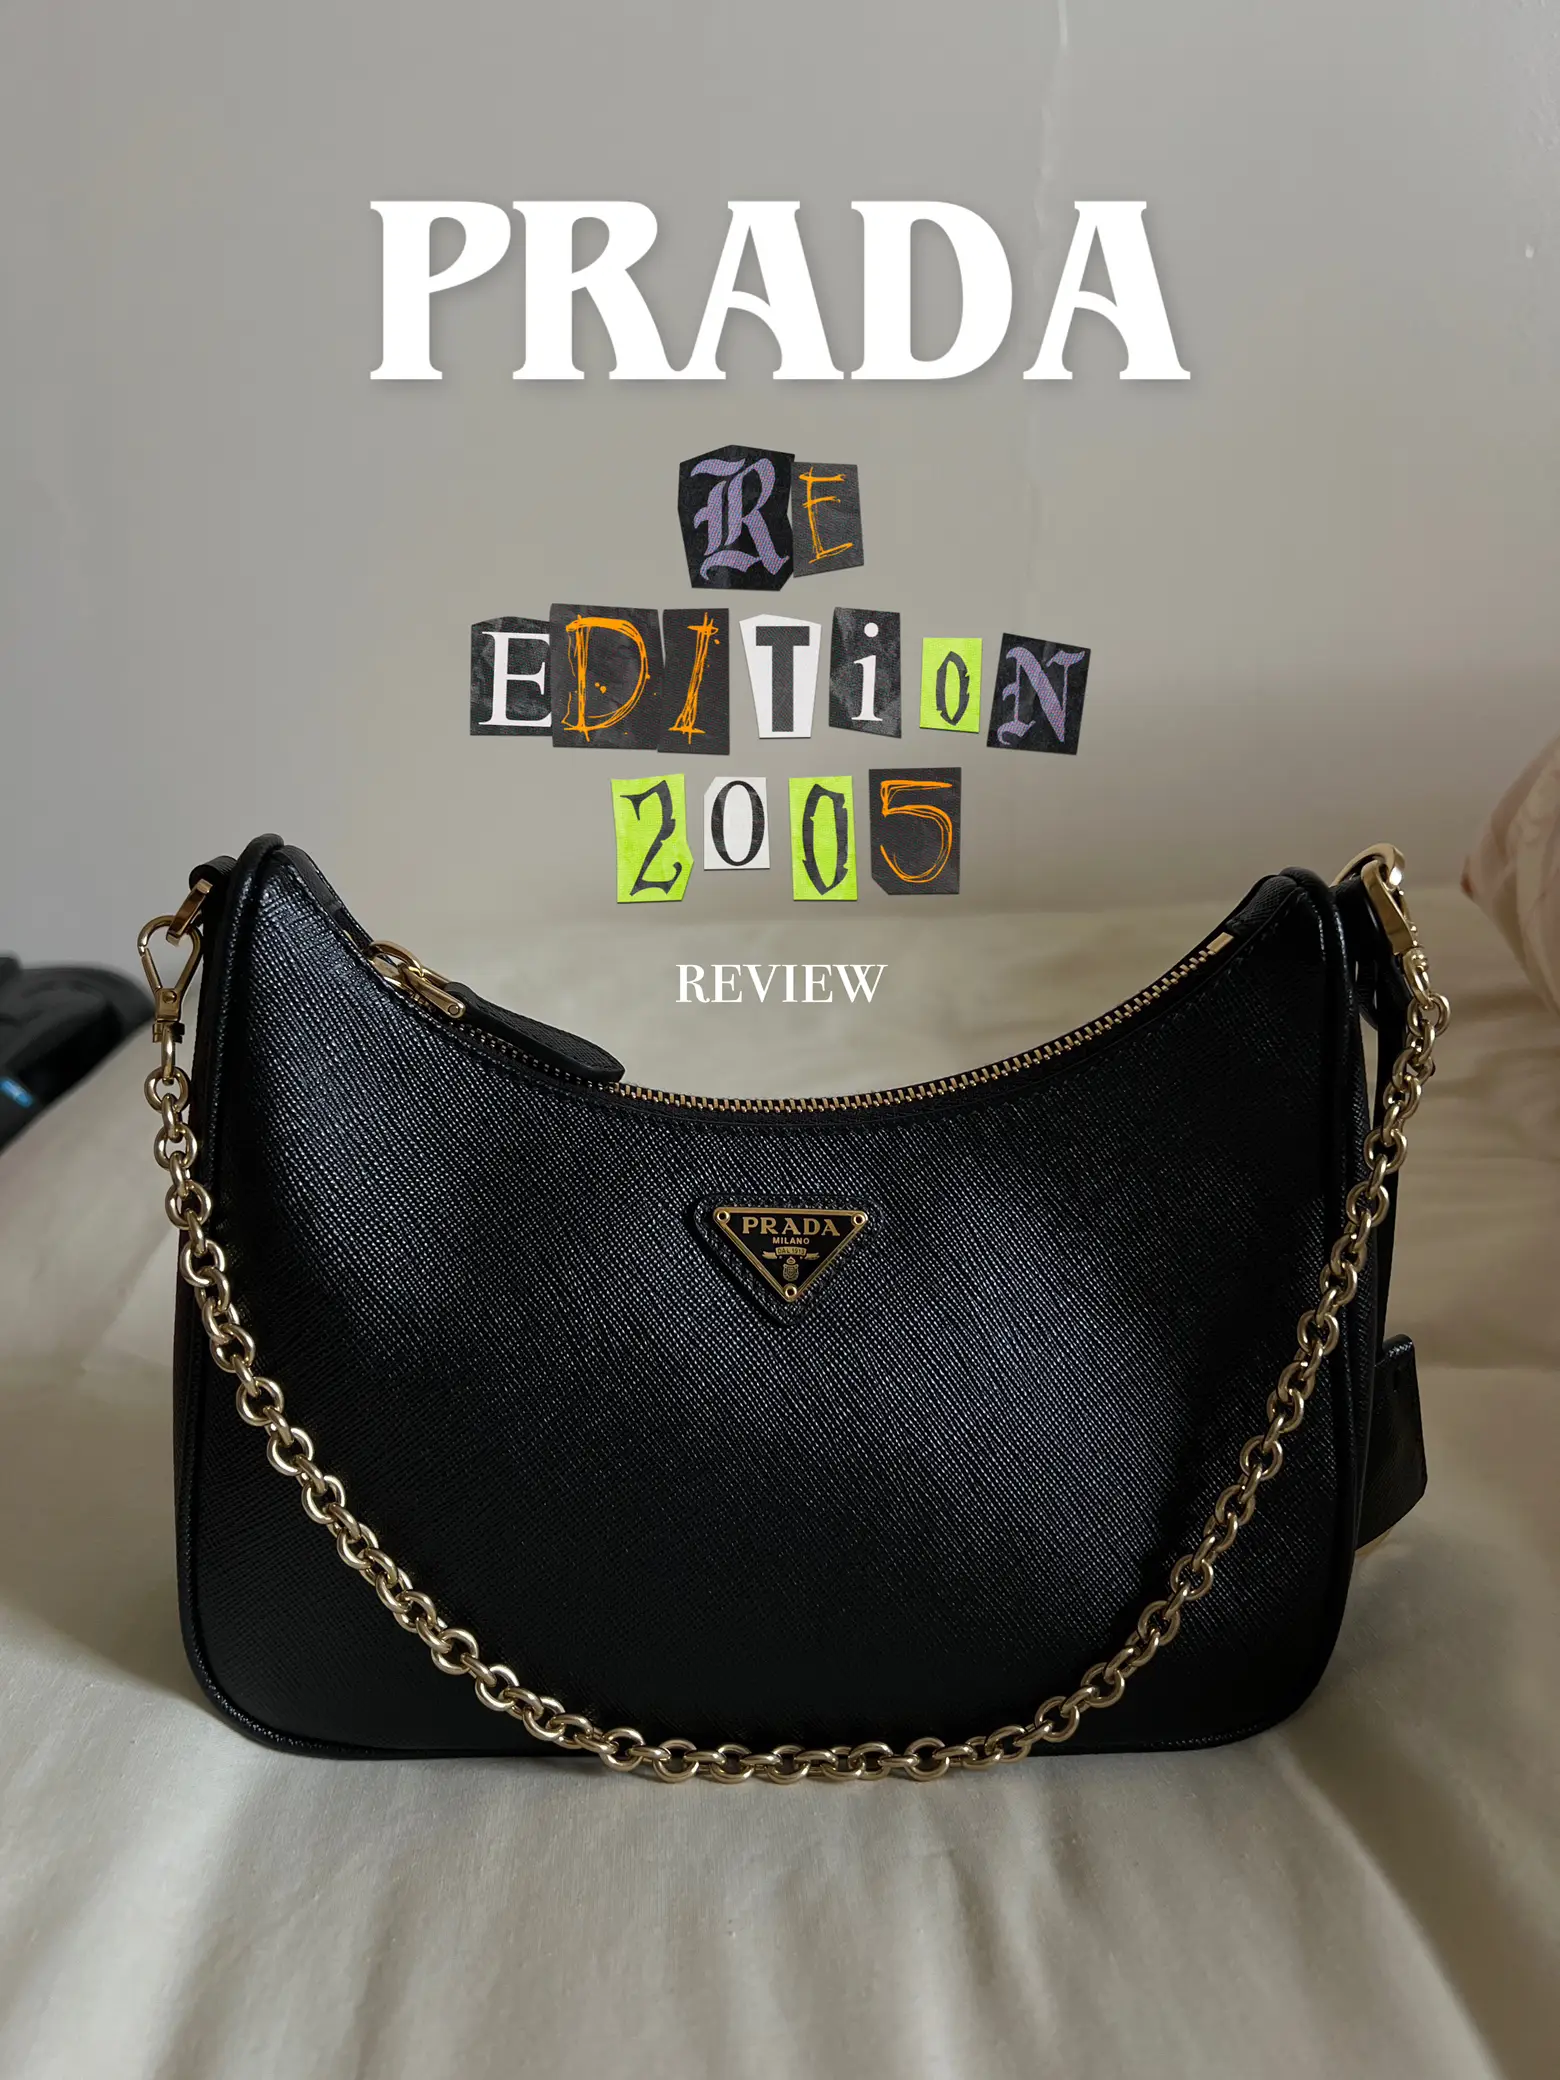 Prada Re-Edition 2005 Review !✨?? | Gallery posted by ???? | Lemon8